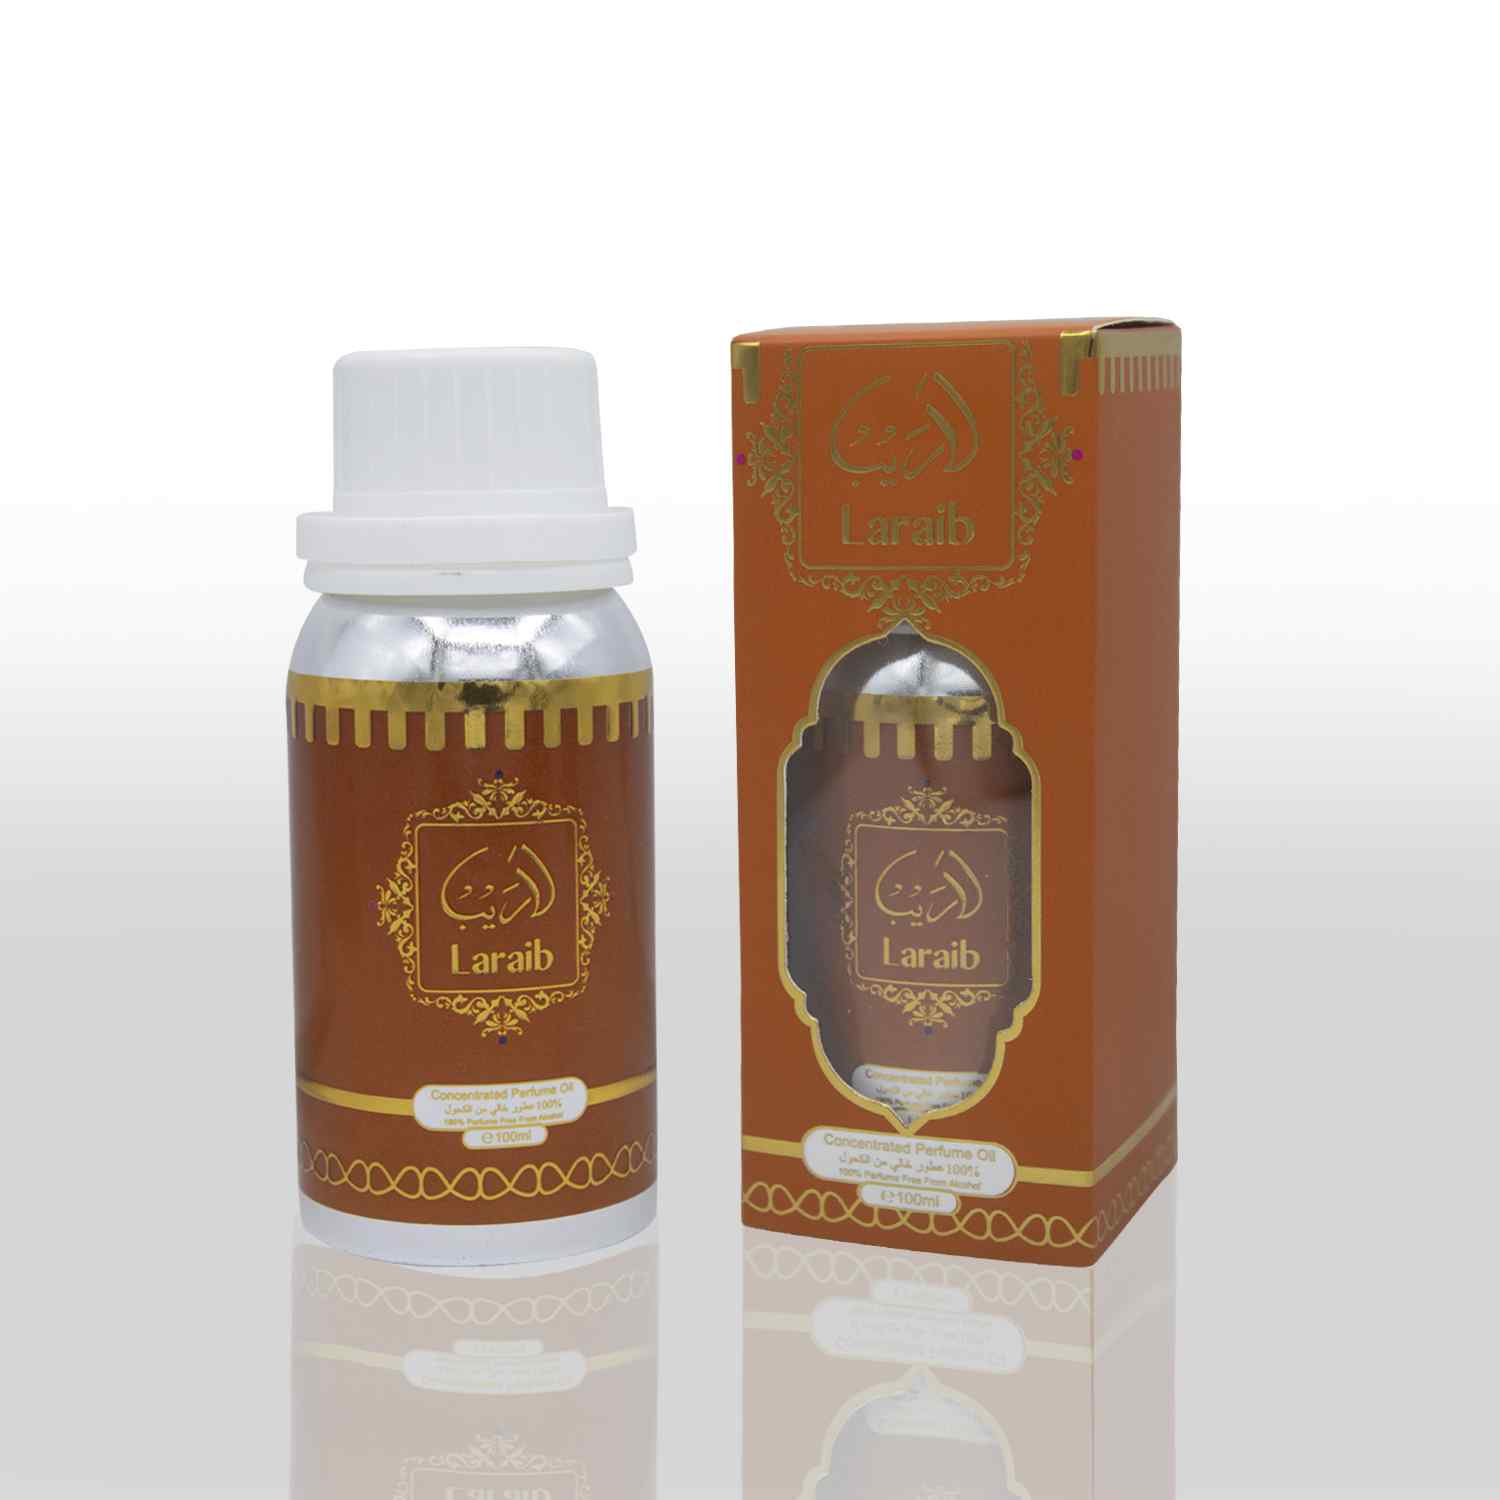 Laraib 100ML concentrated Perfume Oil by ARD PERFUMES